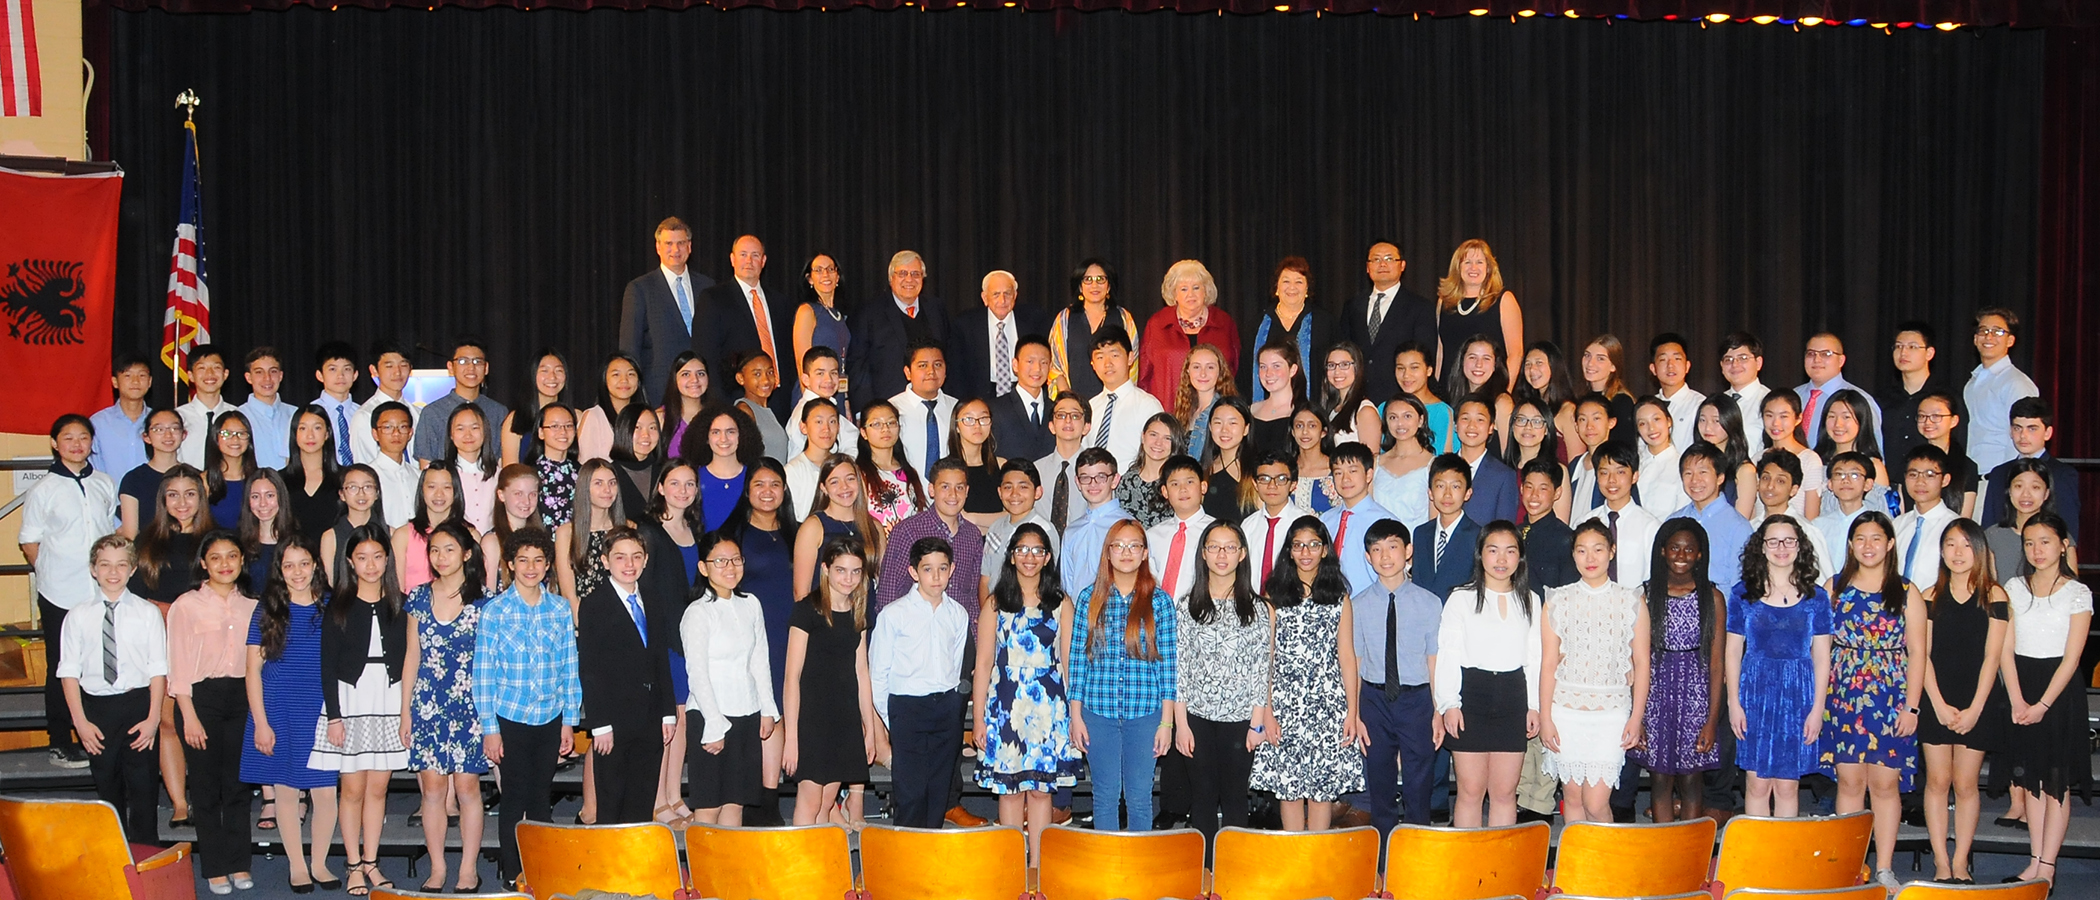 The Great Neck Board of Education commended 98 students at South Middle School for boosting the quality of life at their school. (Photo courtesy of the Great Neck Public Schools)